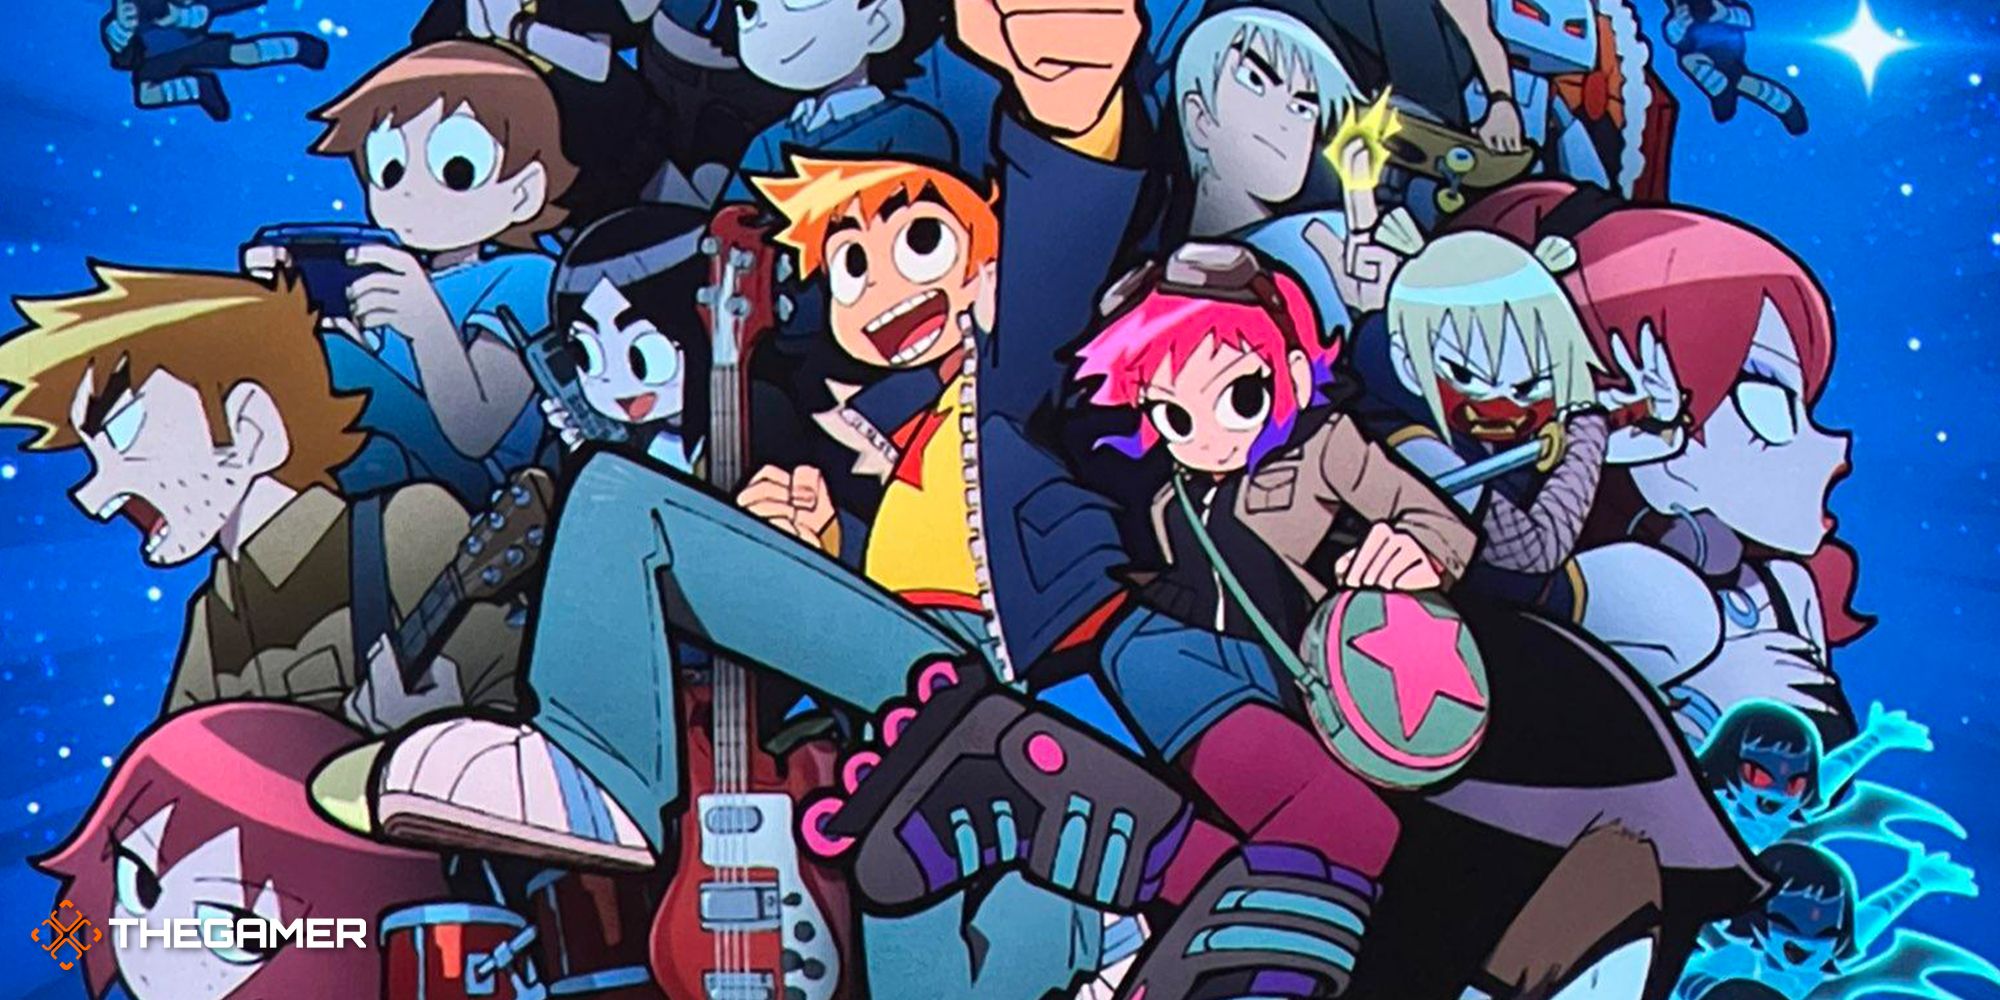 The poster for Scott Pilgrim Takes Off, with most of the major characters pictured.